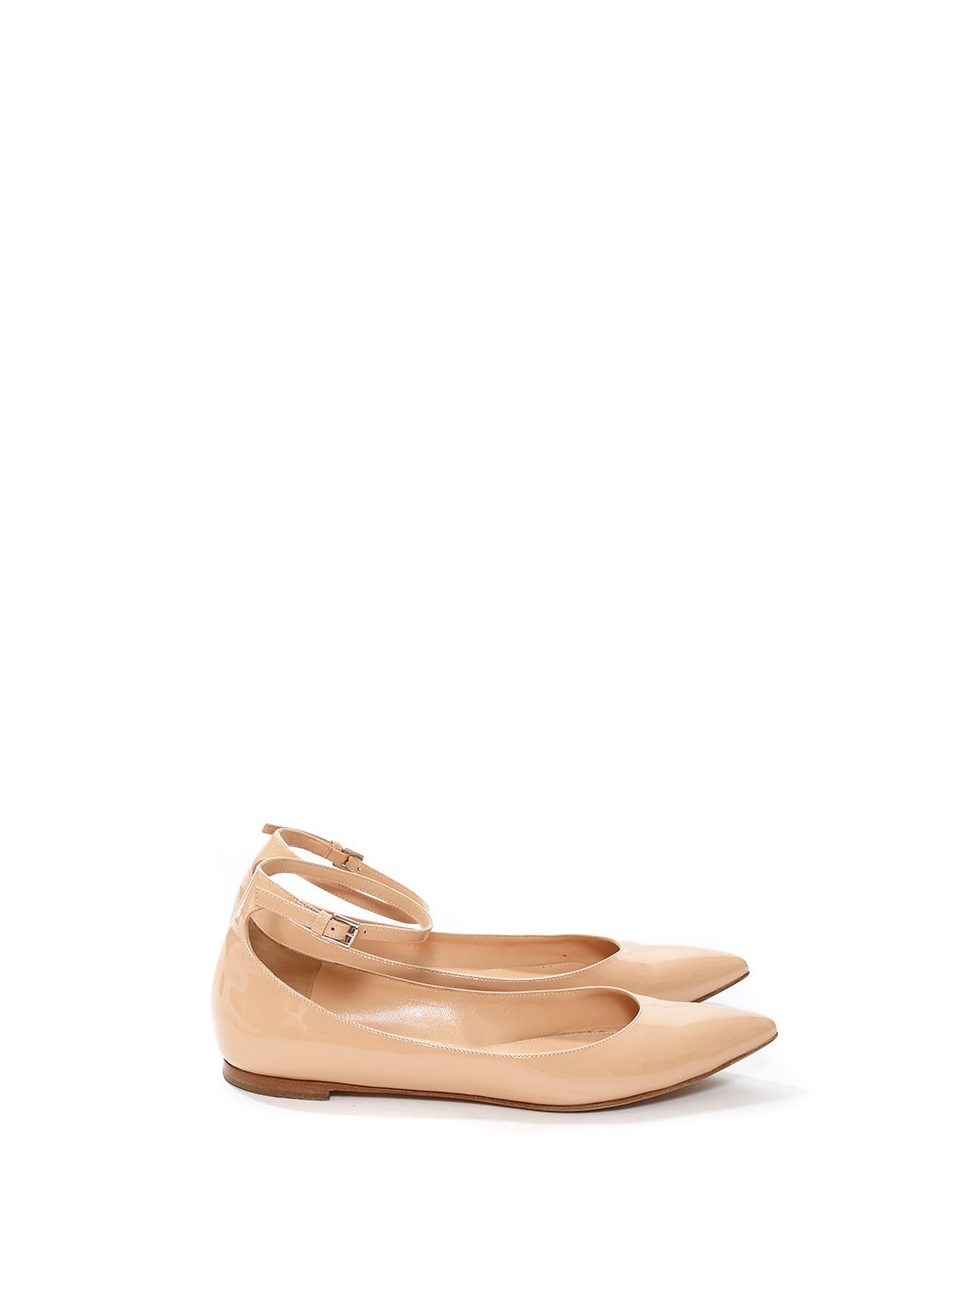 beige patent leather flats